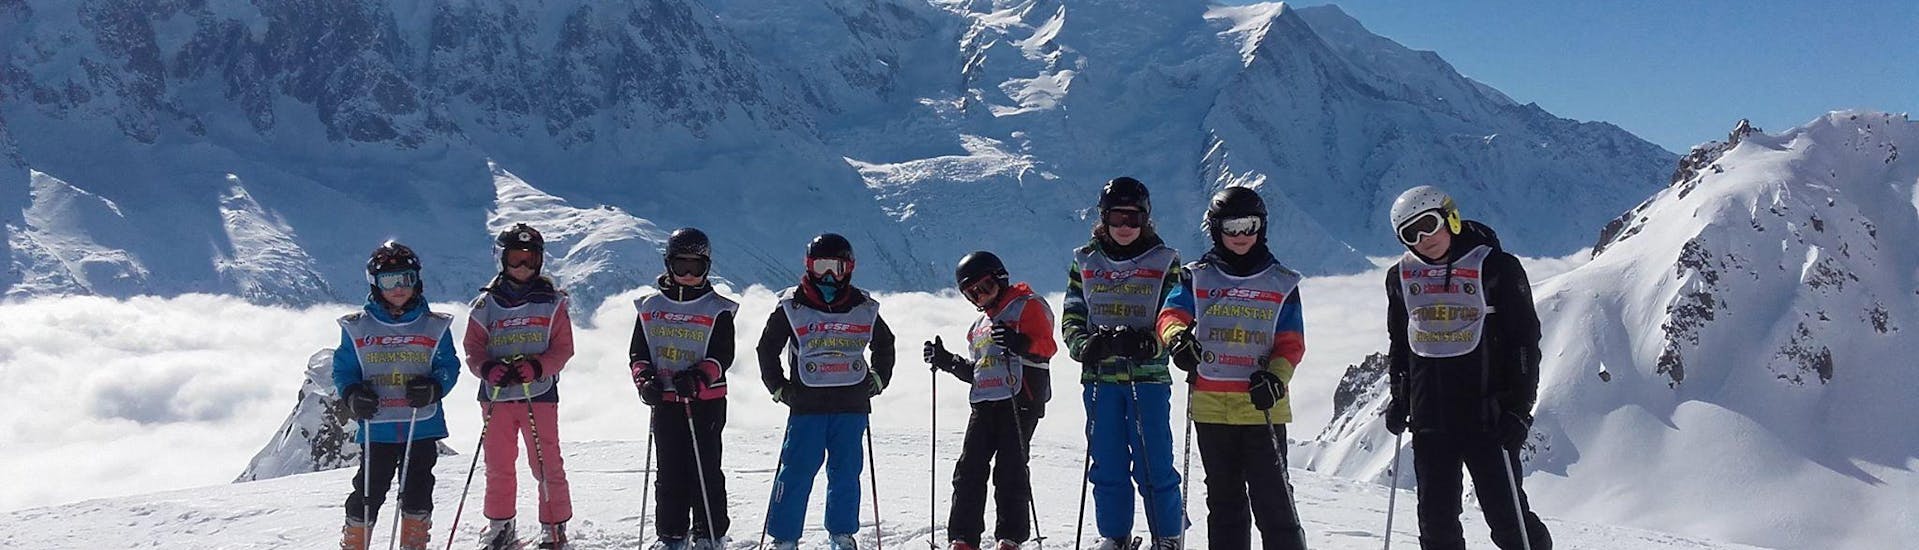 Skiers are standing in line in front of a snow-covered mountain landscape backdrop during their Kids Ski Lessons (5-12 years) - Low Season - Advanced with the ski school ESF Chamonix.